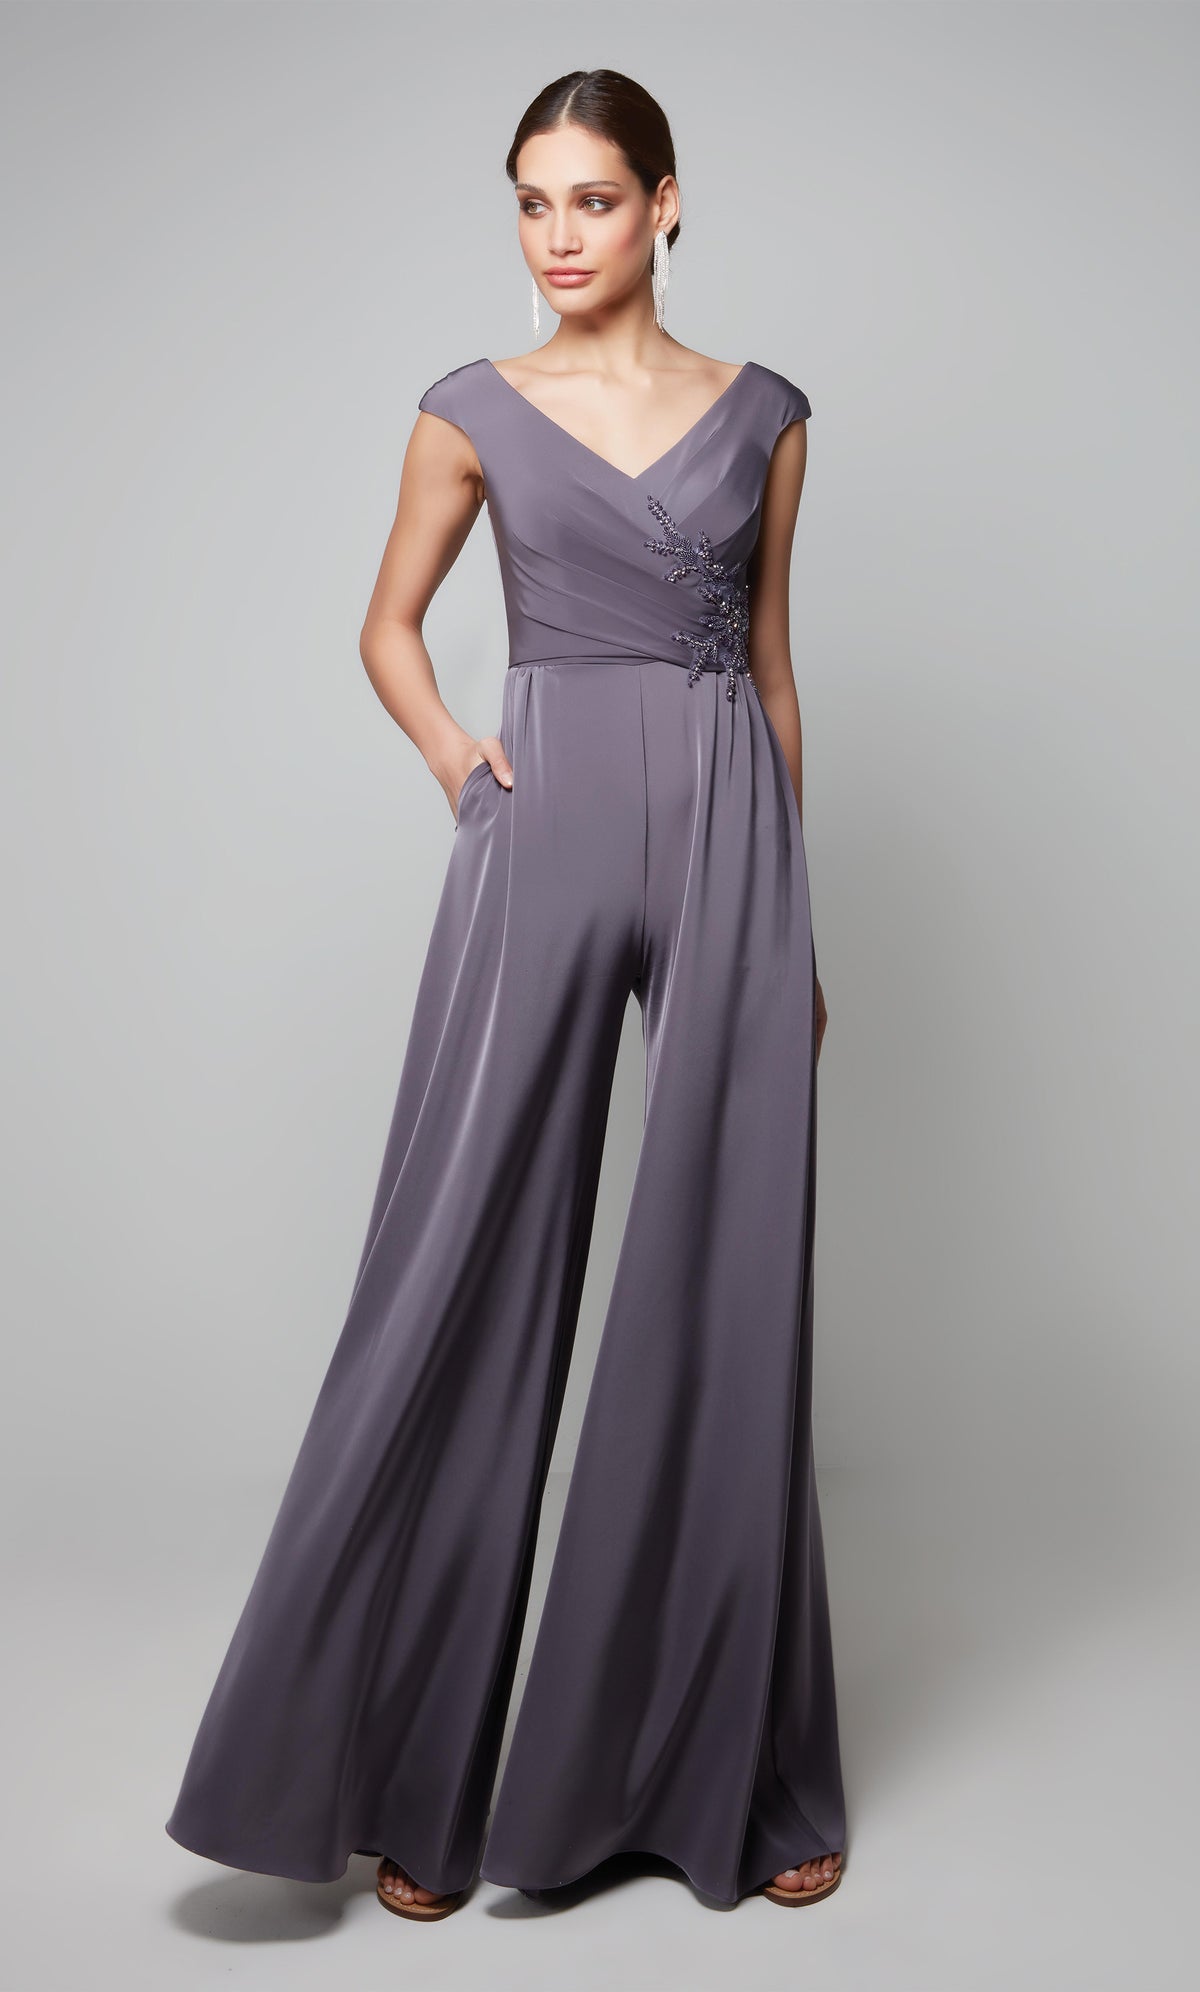 Graphite mother of the bride jumpsuit with lace applique at the waist.